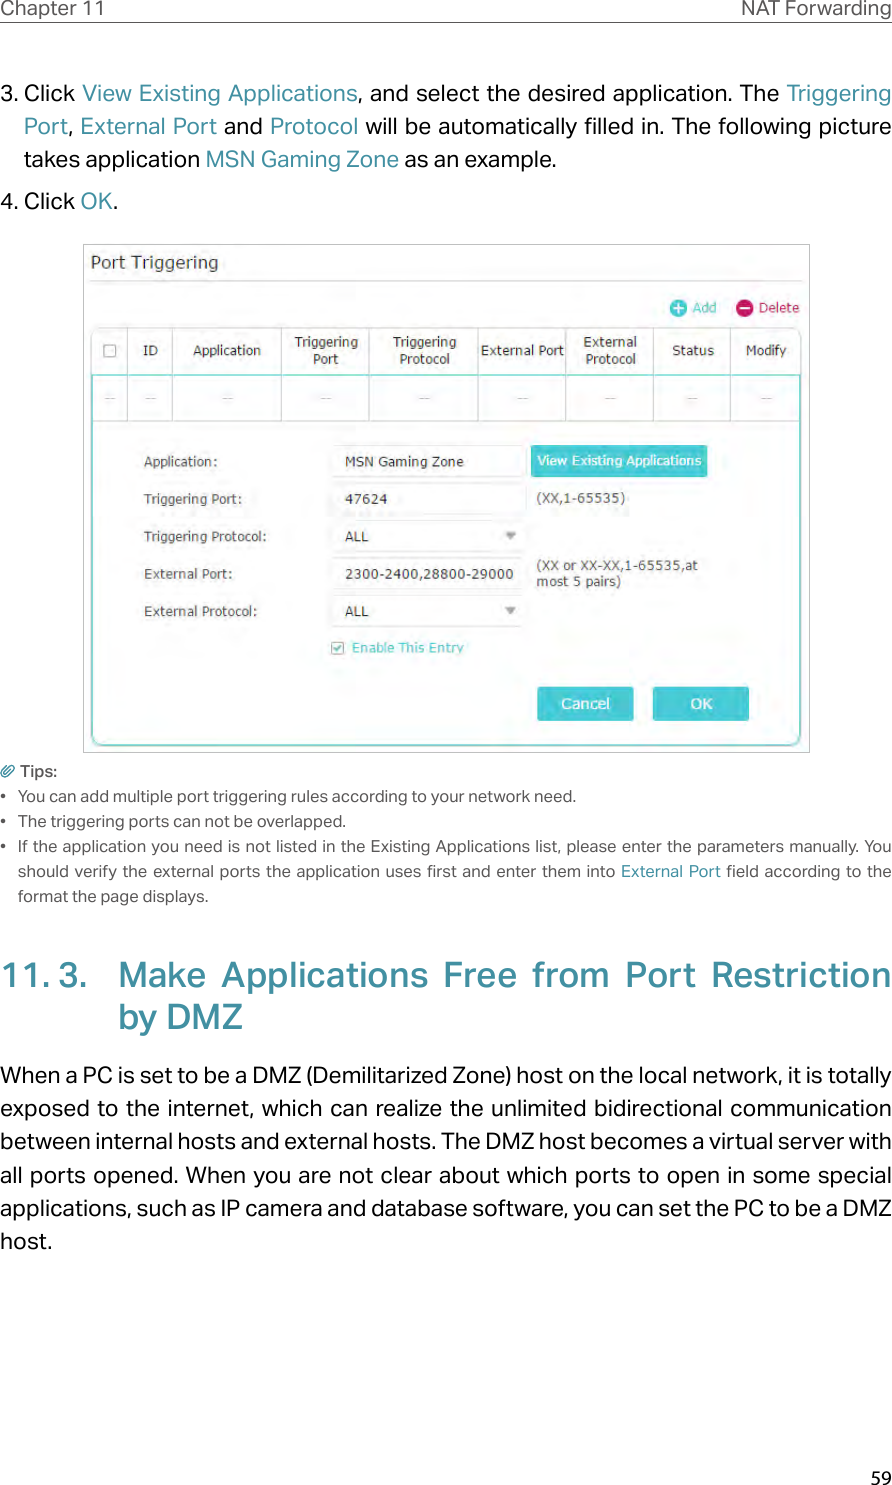 59Chapter 11 NAT Forwarding3. Click View Existing Applications, and select the desired application. The Triggering Port, External Port and Protocol will be automatically filled in. The following picture takes application MSN Gaming Zone as an example.4. Click OK.Tips:•  You can add multiple port triggering rules according to your network need.•  The triggering ports can not be overlapped.•  If the application you need is not listed in the Existing Applications list, please enter the parameters manually. You should verify the external ports the application uses first and enter them into External Port field according to the format the page displays.11. 3.  Make Applications Free from Port Restriction by DMZWhen a PC is set to be a DMZ (Demilitarized Zone) host on the local network, it is totally exposed to the internet, which can realize the unlimited bidirectional communication between internal hosts and external hosts. The DMZ host becomes a virtual server with all ports opened. When you are not clear about which ports to open in some special applications, such as IP camera and database software, you can set the PC to be a DMZ host.